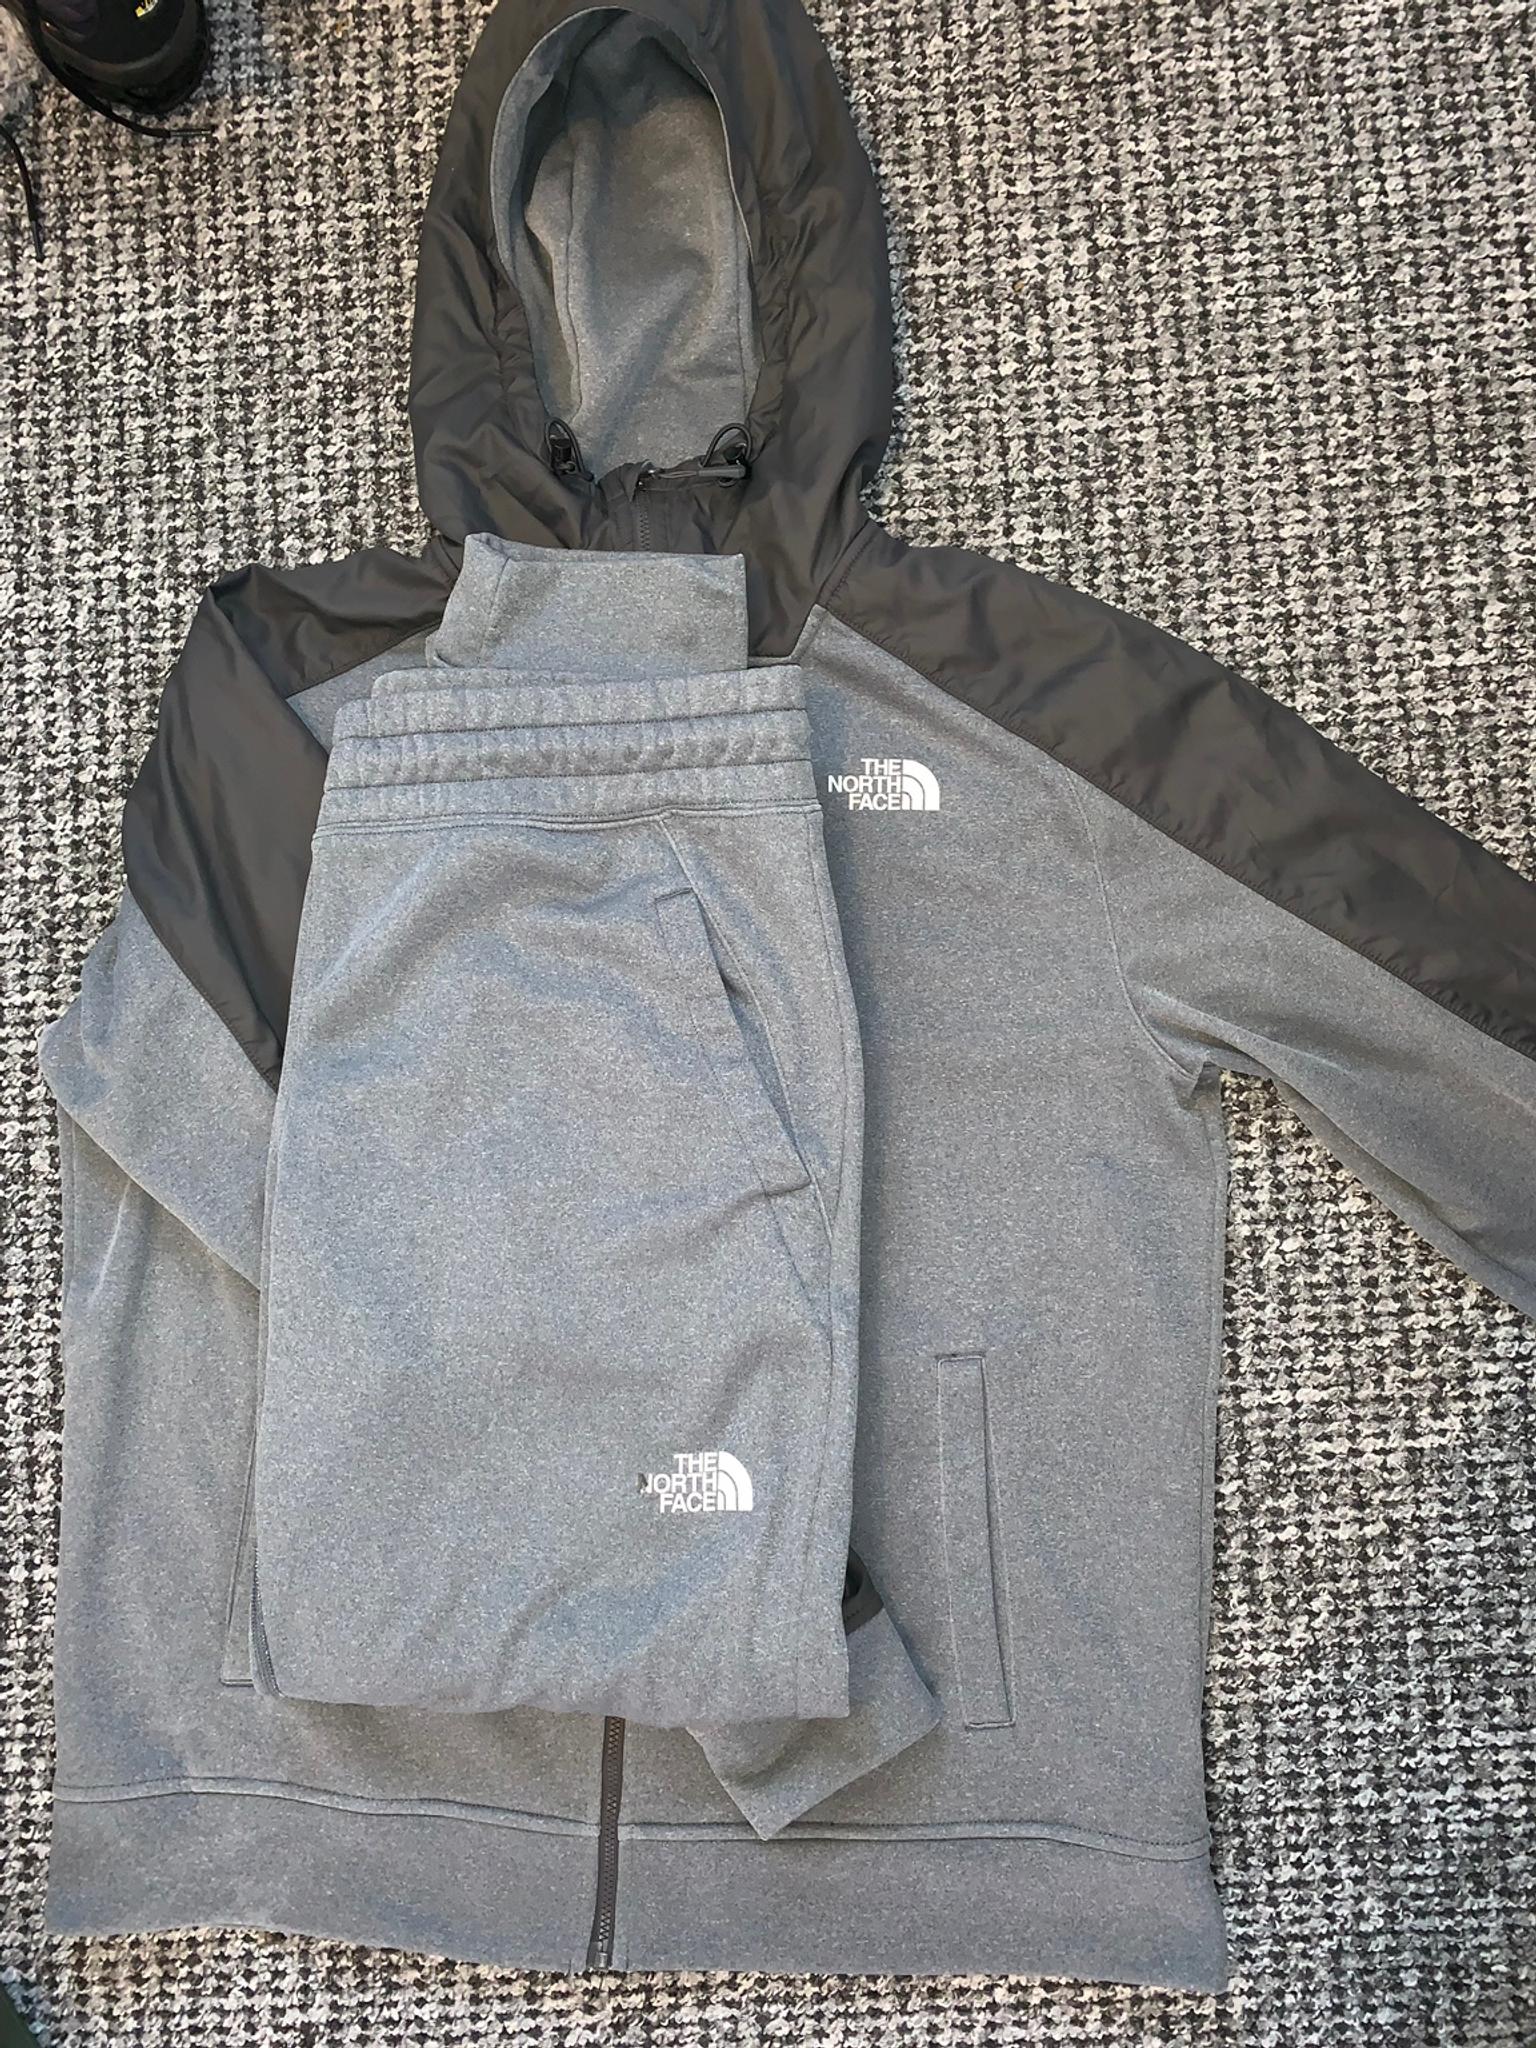 the north face tracksuit sale